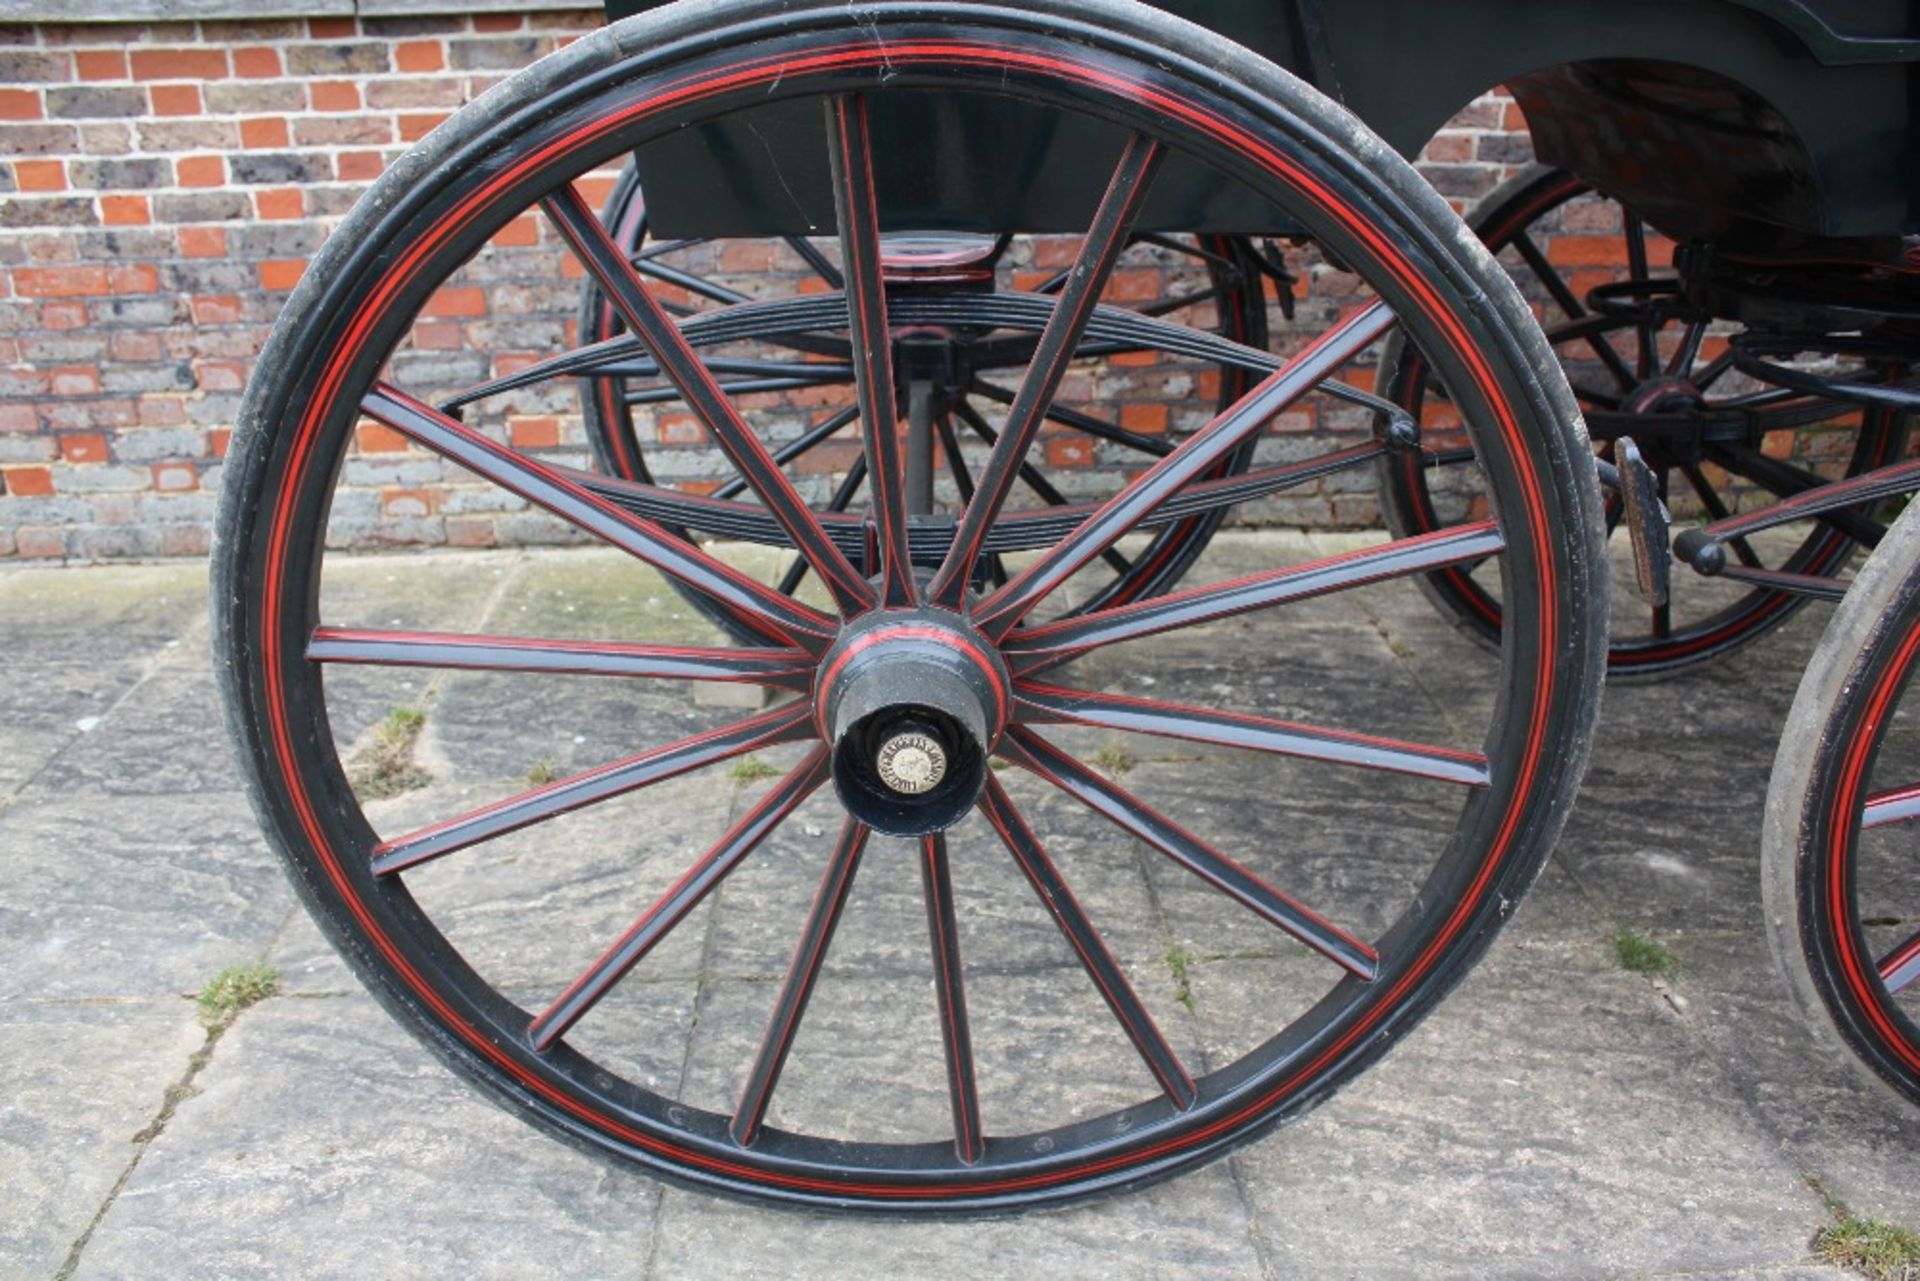 DEMI MAIL PHAETON by Thrupp and Maberley of London. An important and now rare formal carriage - Image 18 of 20